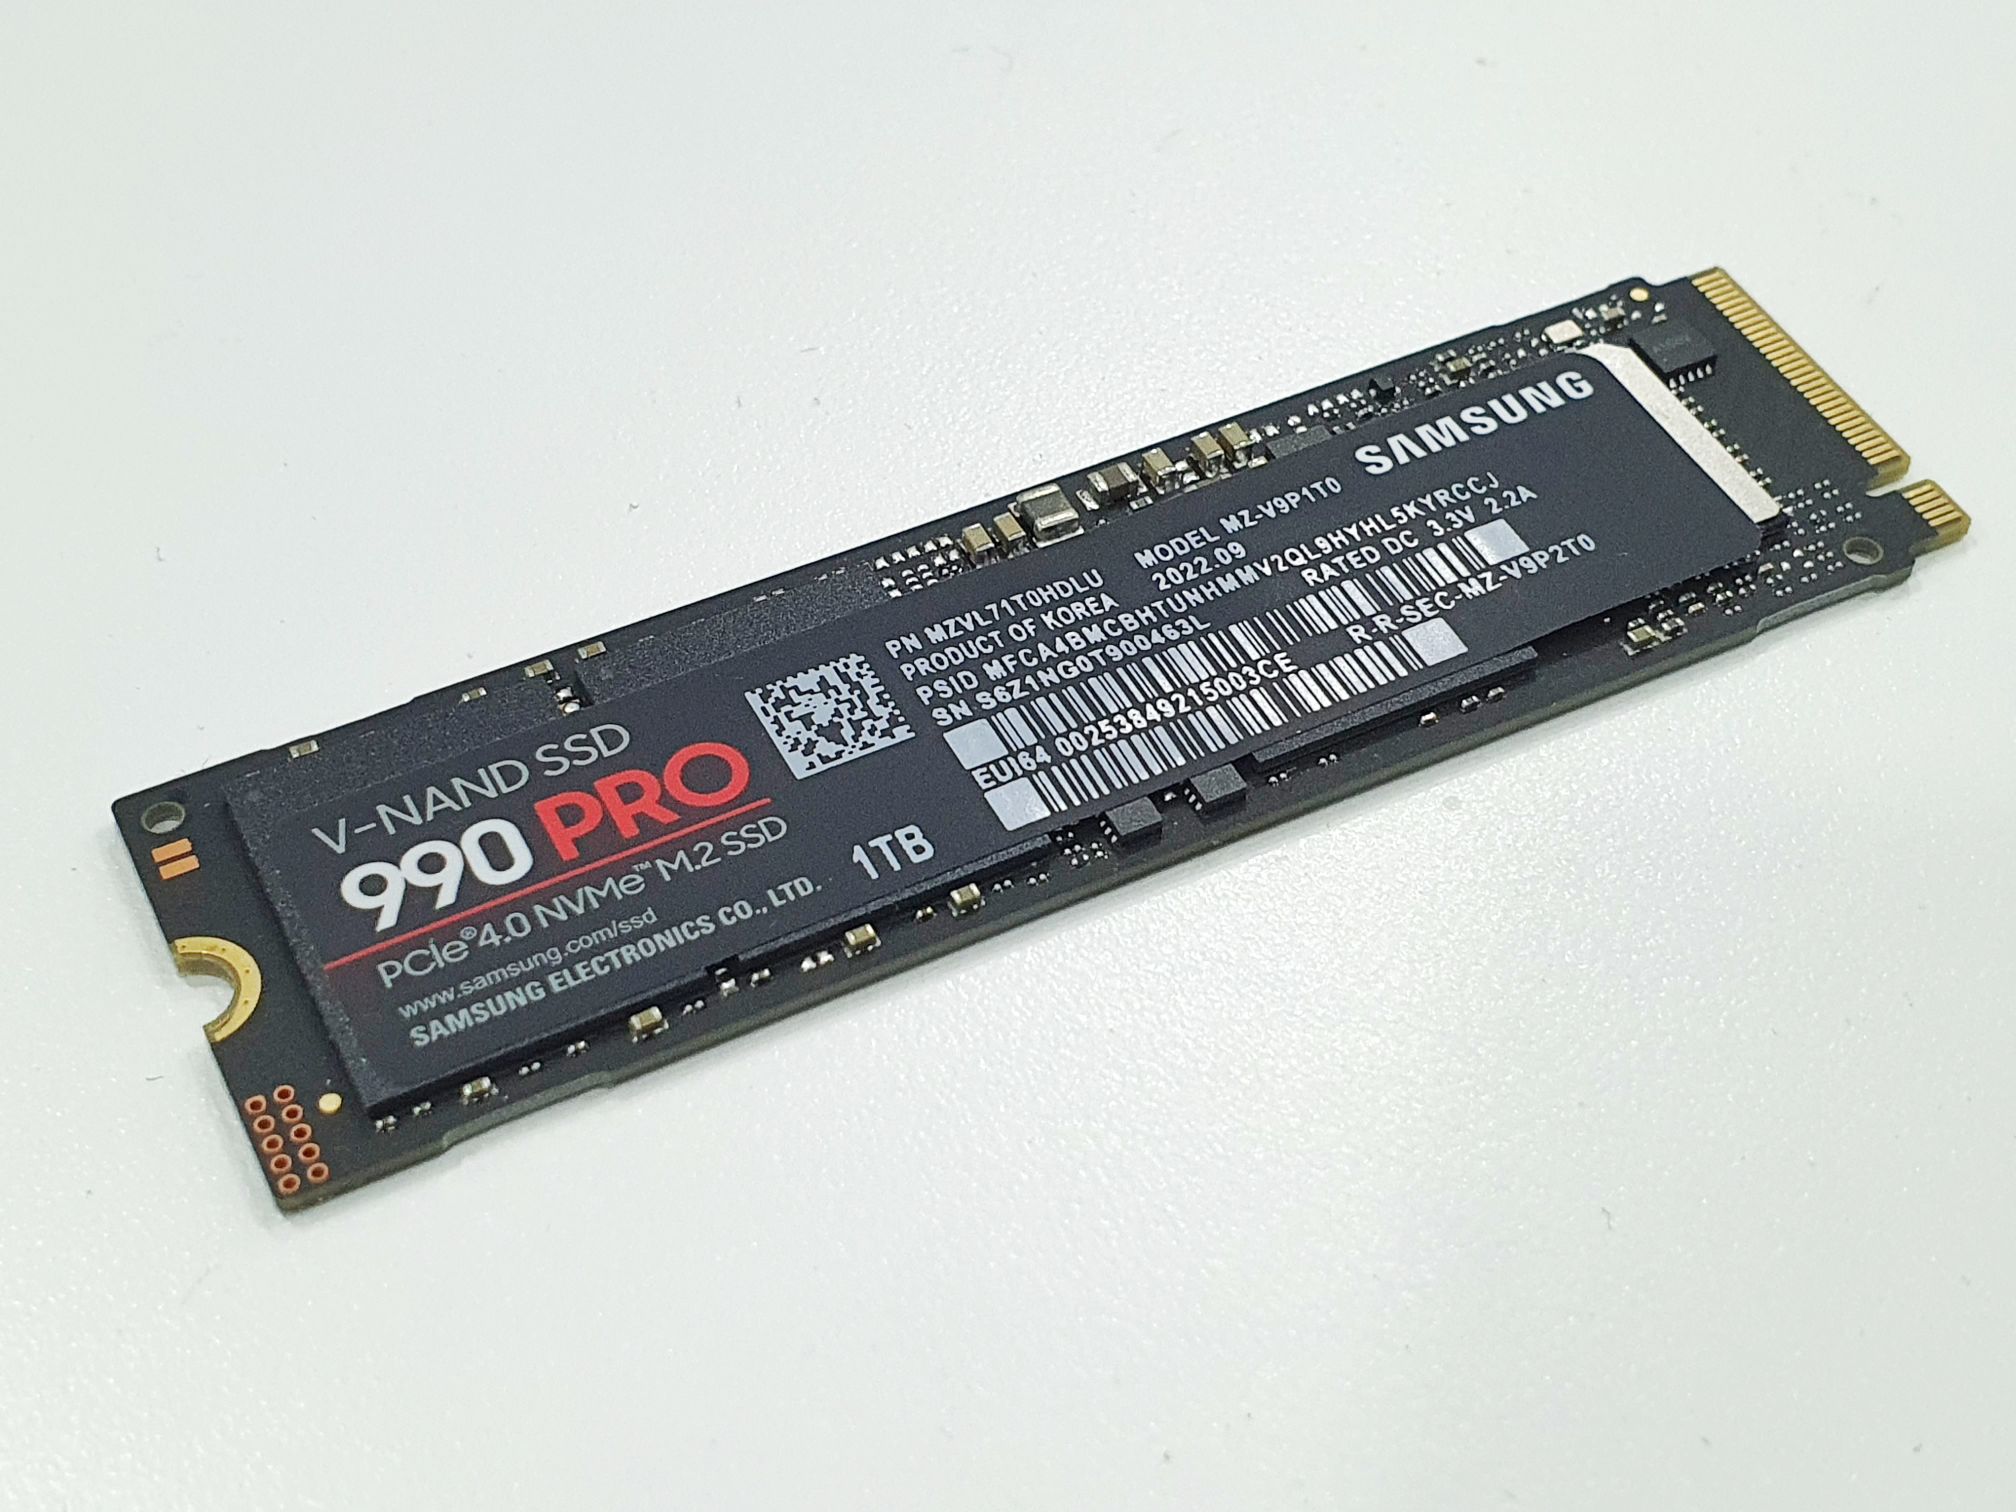 Samsung 980 Pro SSD Review – One of the fastest PCIe 4.0 SSDs in the market